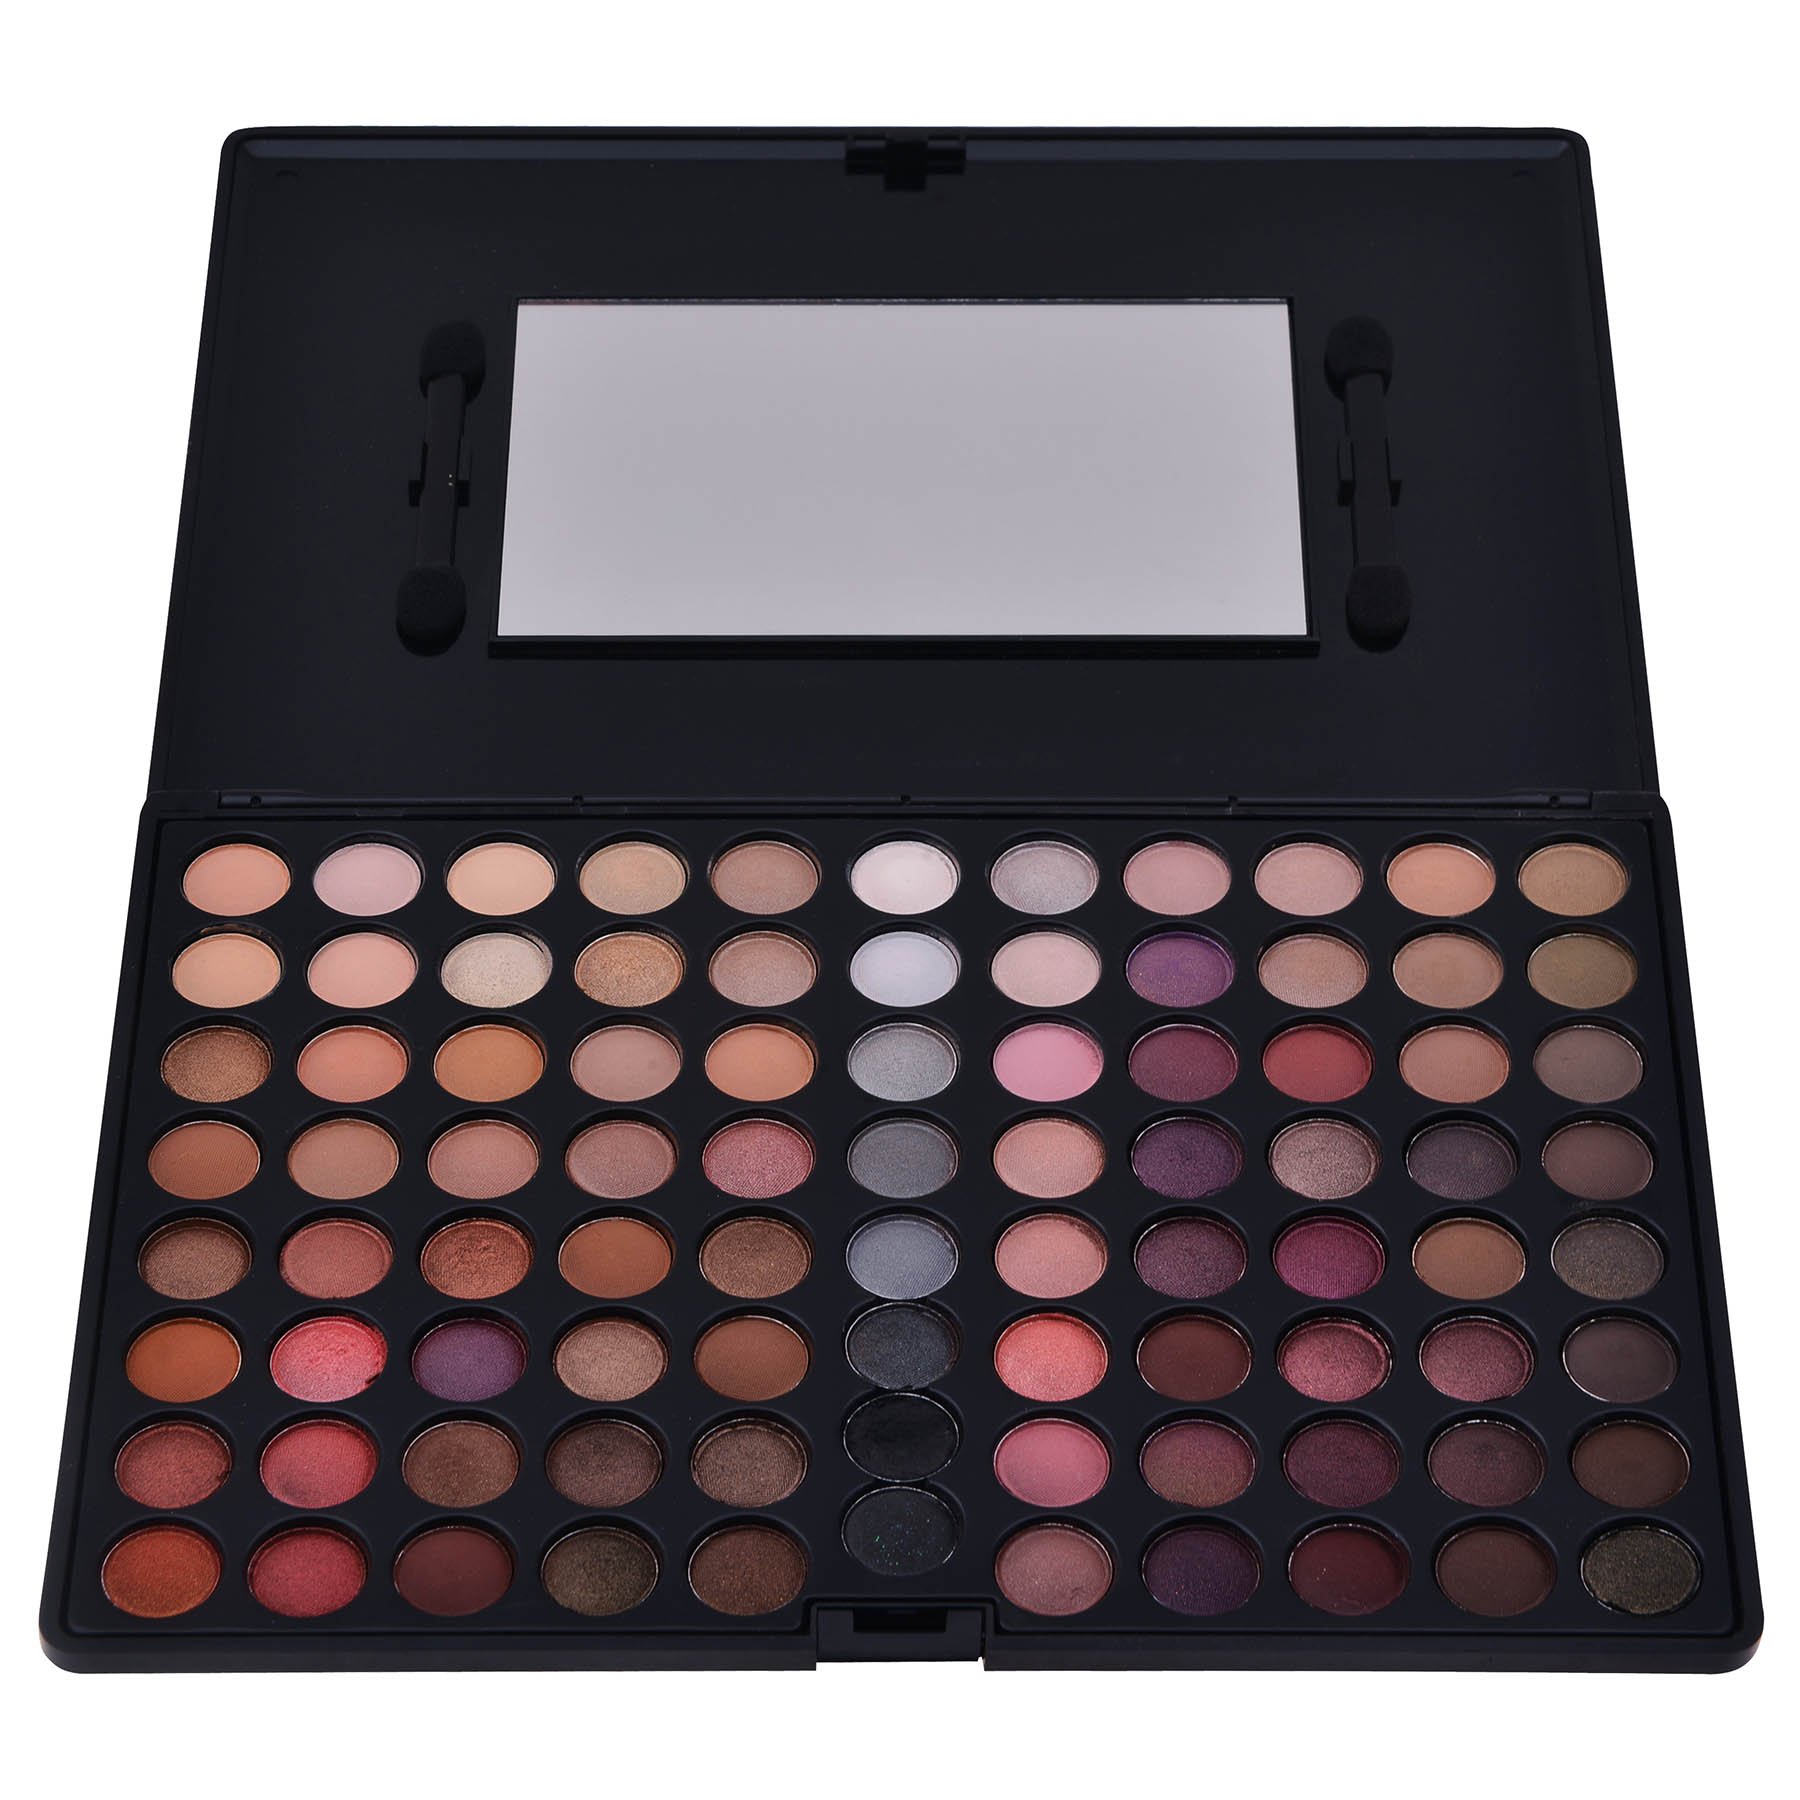 SHANY Natural Fusion Makeup Palette - 88 Color Highly Pigmented Blendable Natural Color Matte Eye shadow Palette - Nude